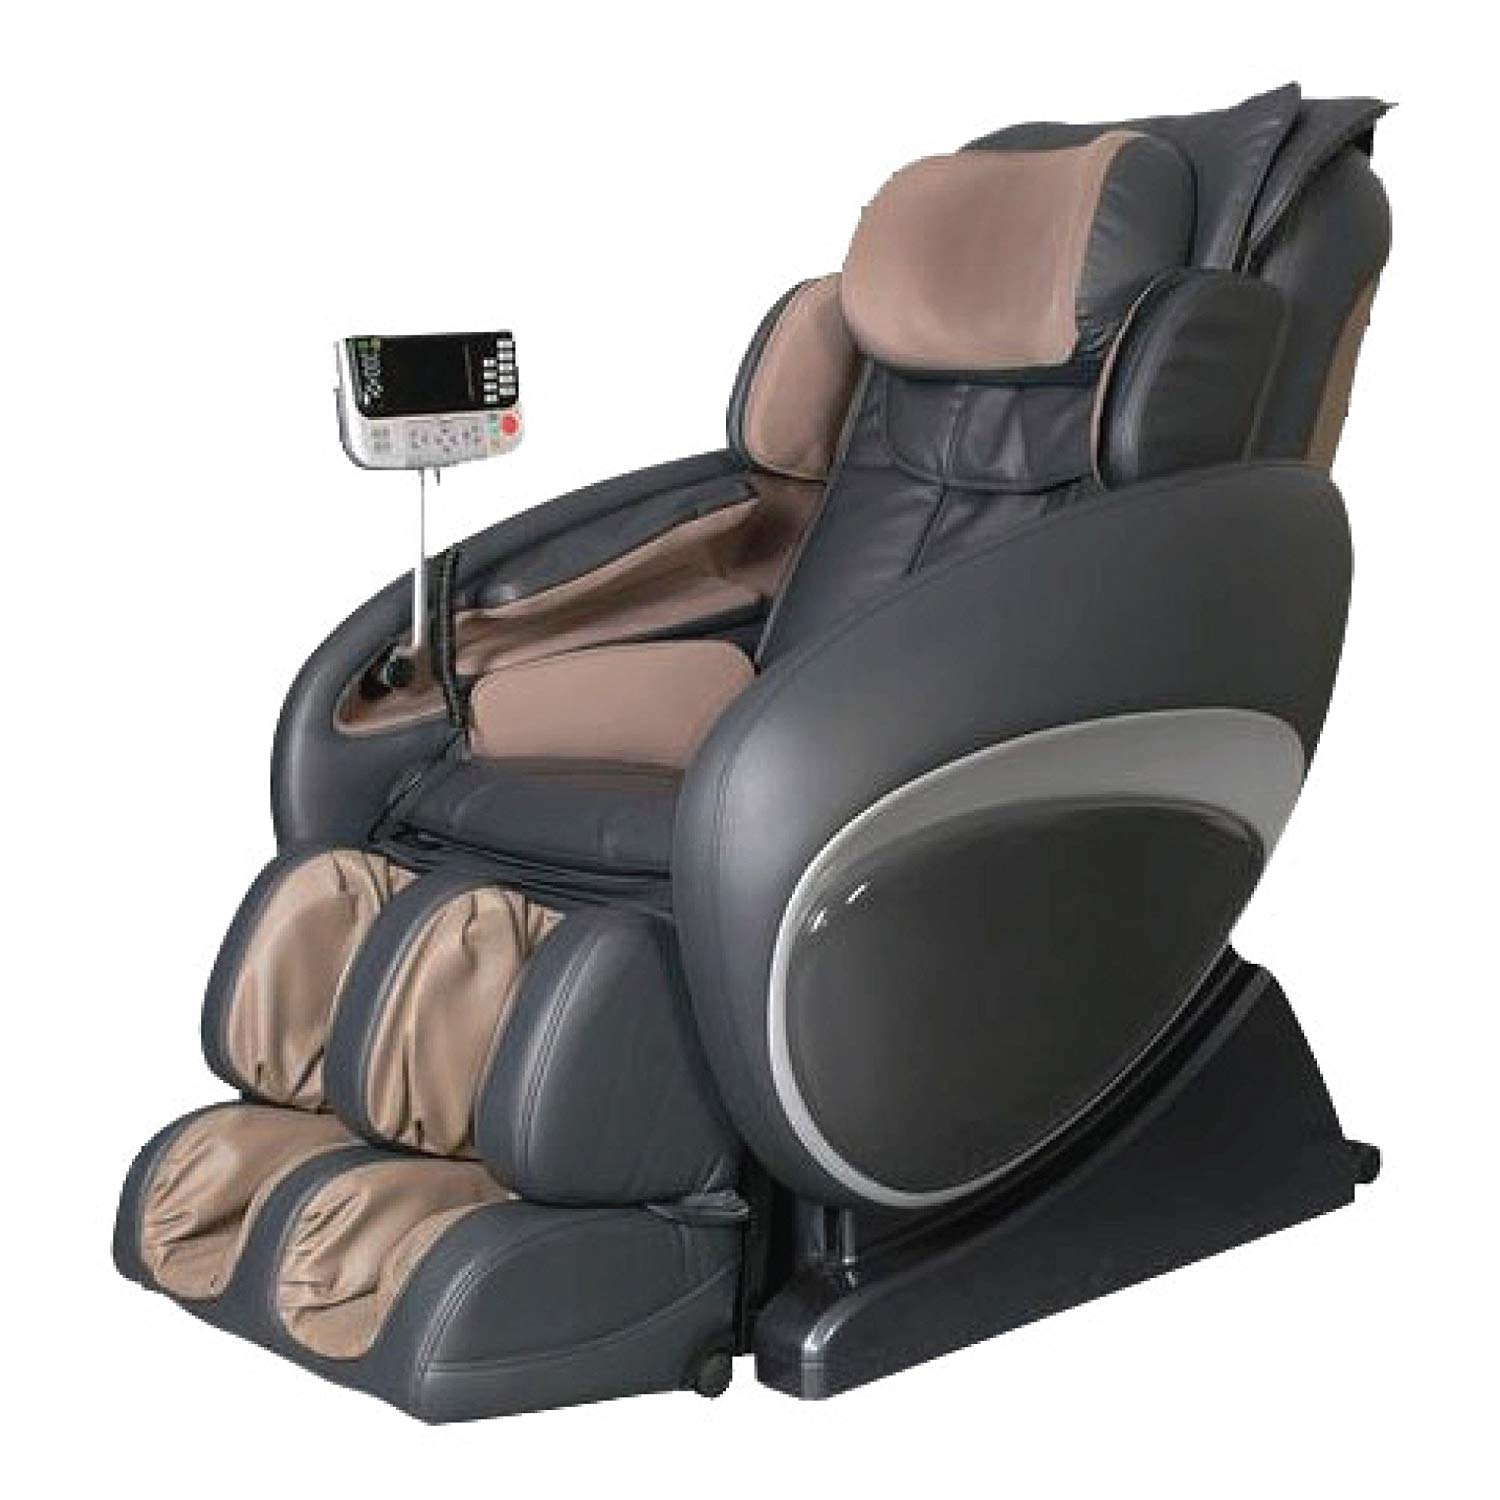 Osaki OS-4000 Massage Chair User Review